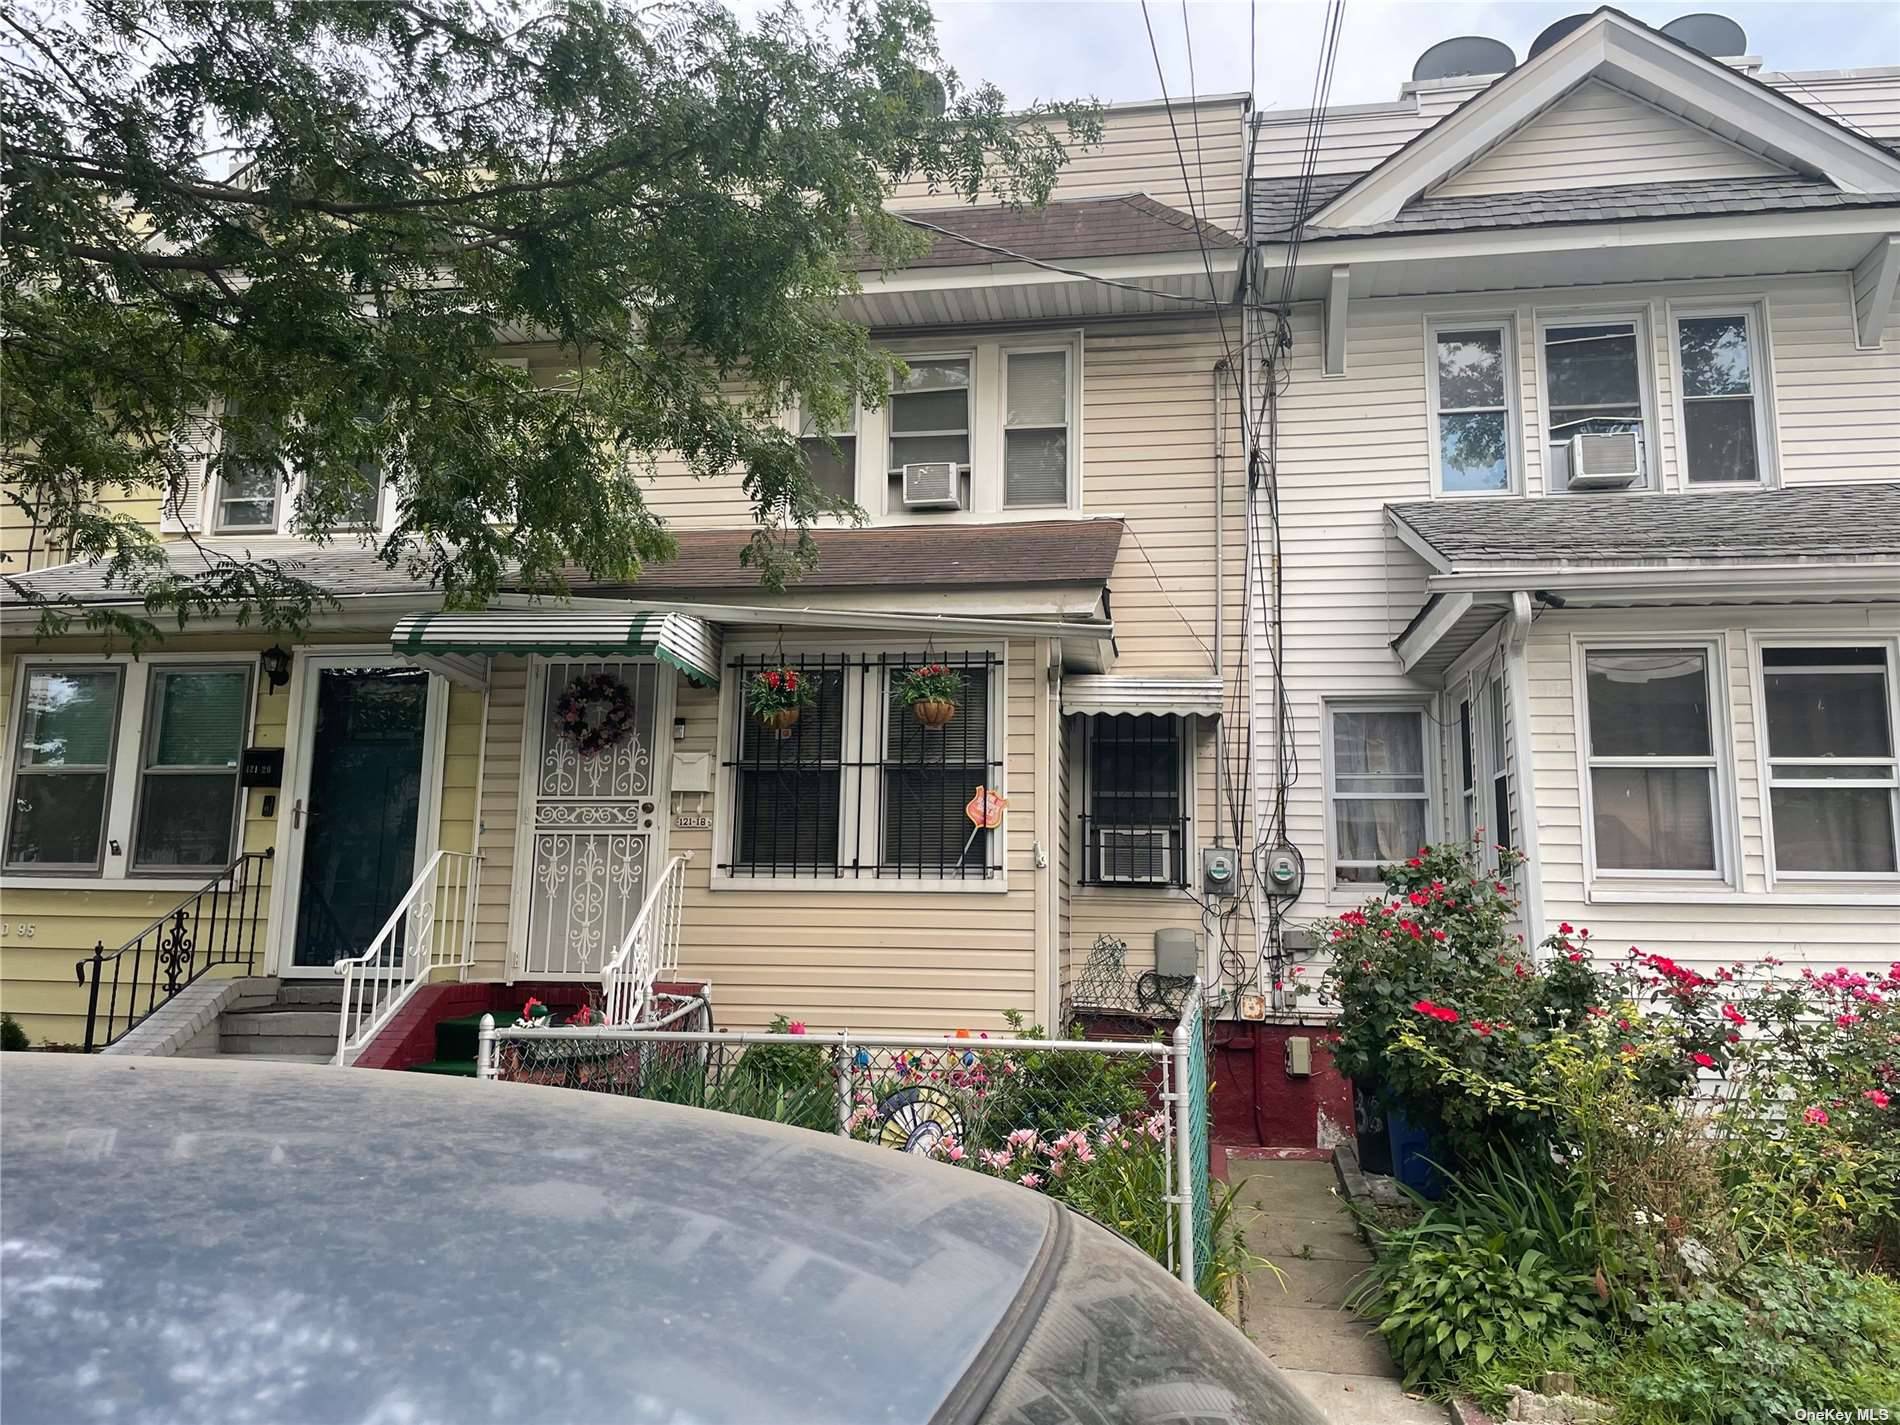 BUYERS DREAM, WELL MAINTAINED 1 FAMILY HOME IN VERY MUCH DESIRABLE AREA OF RICHMOND HILL, QUEENS, NY.